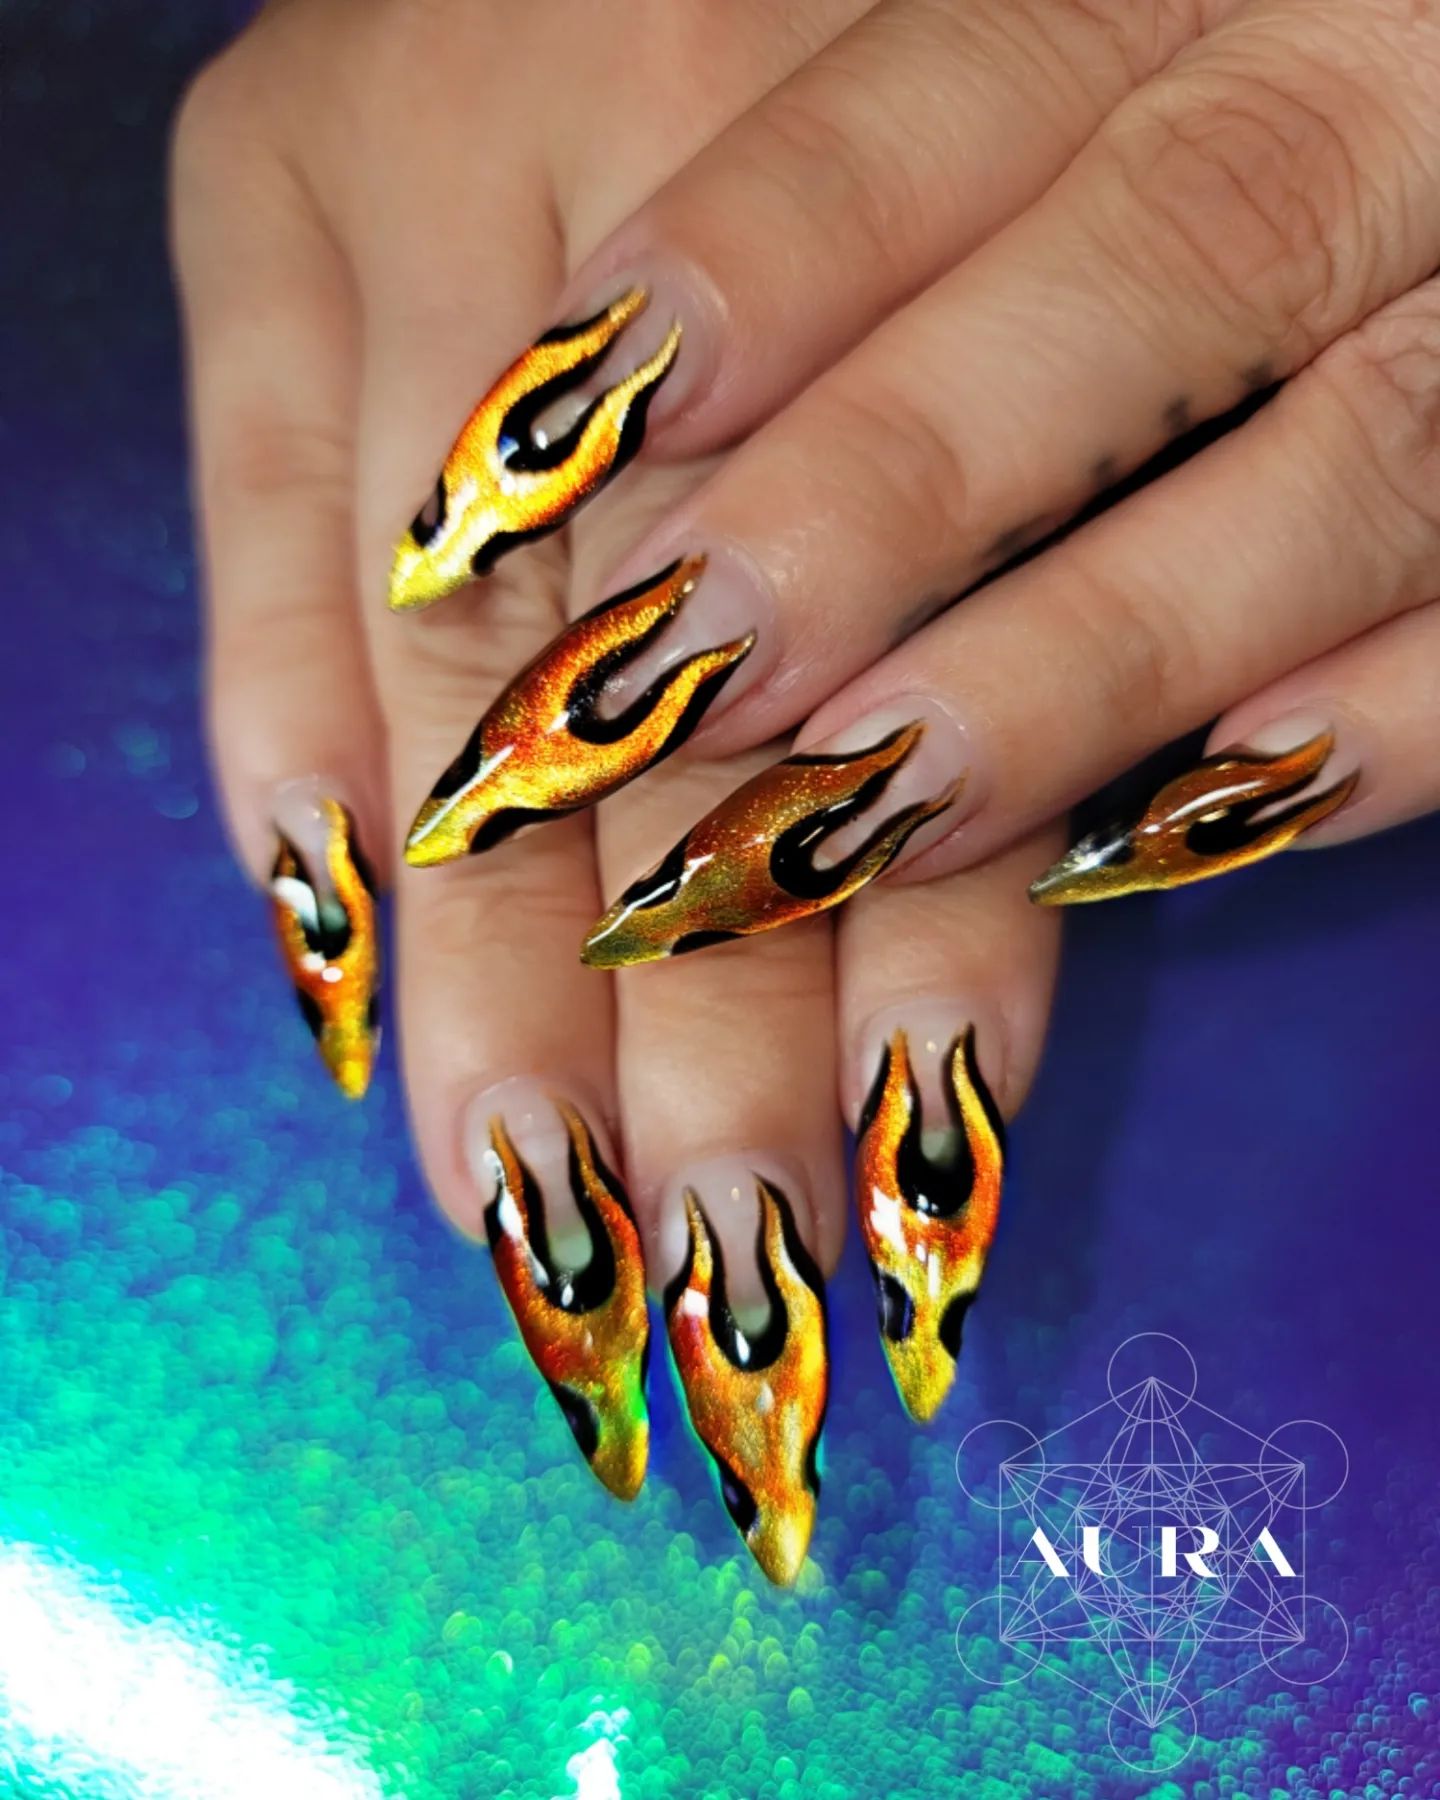 Aren't these nails are super fabulous? Playing with lighting looks super fun both for the nail artist and the one who gets this nail art. Everyone around you will want to check your nails closely.